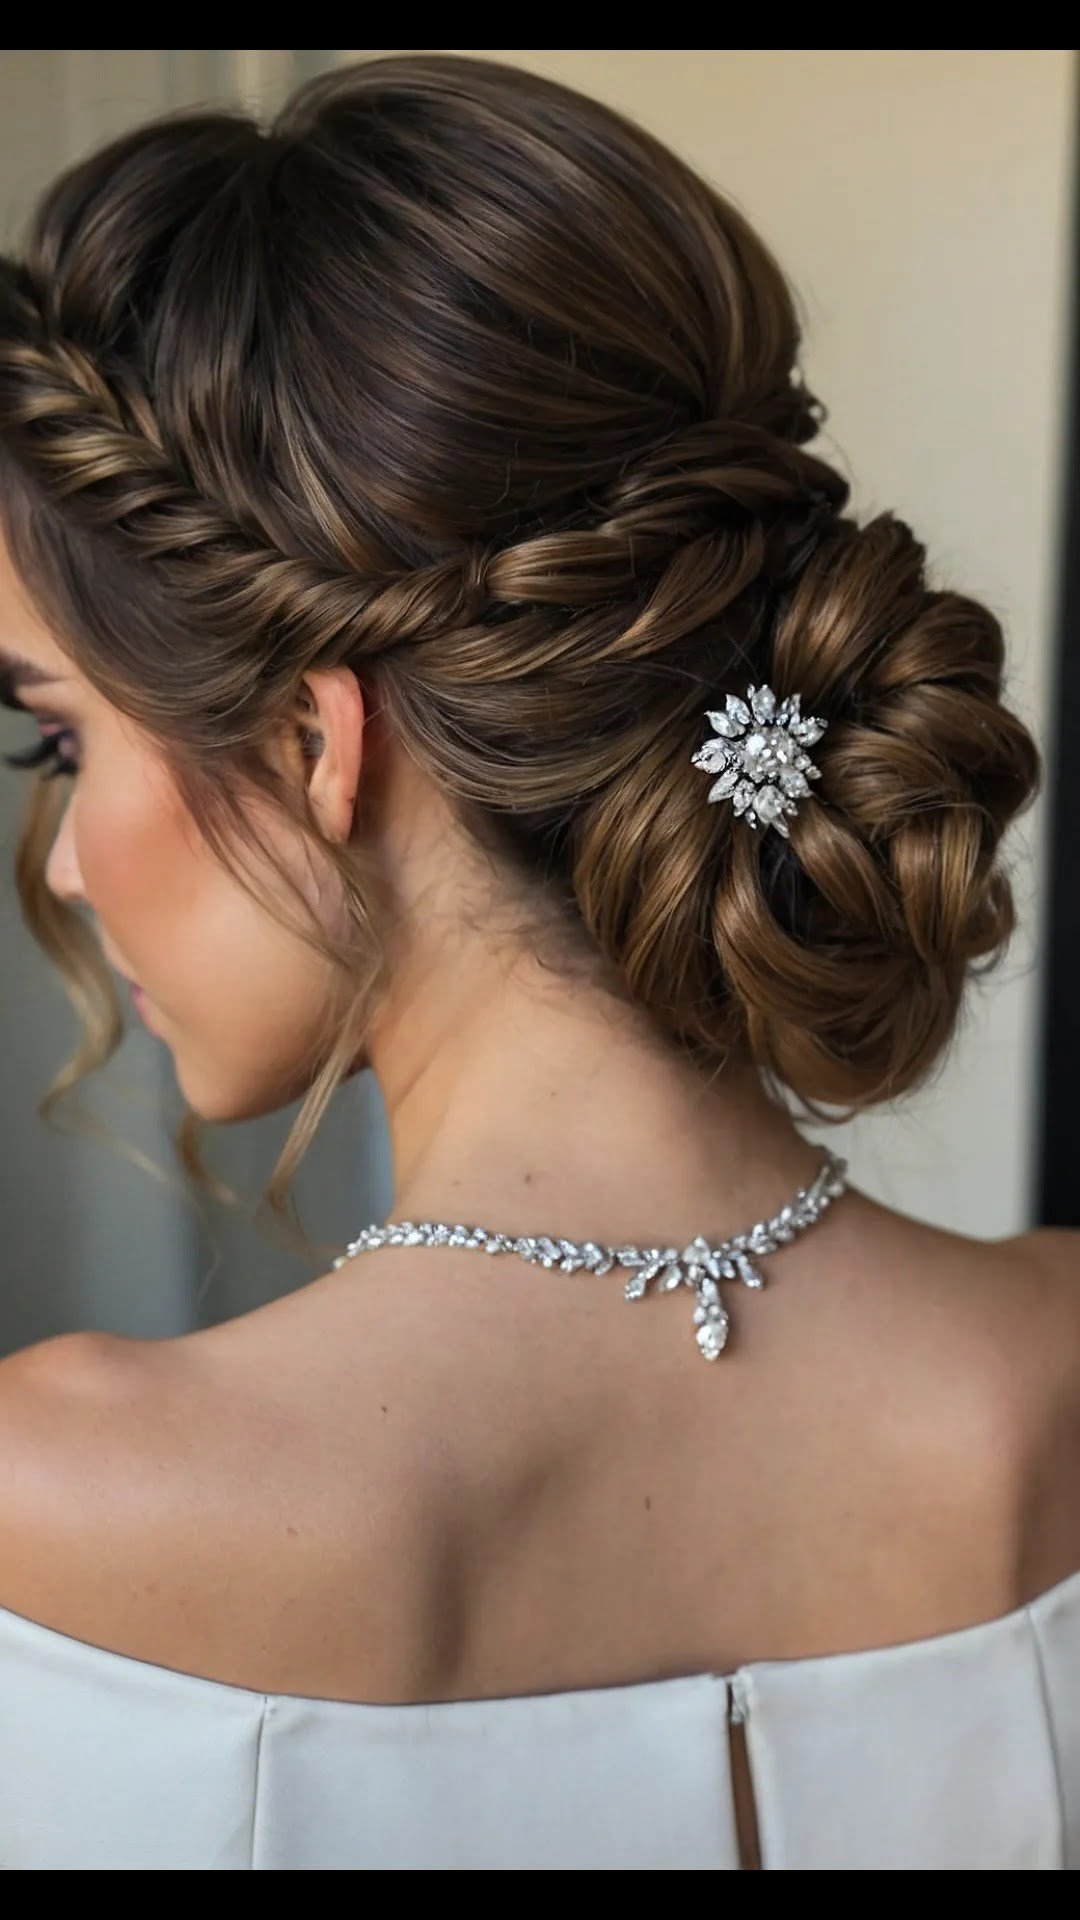 Sophisticated Swirl Updo with Crystal Charm